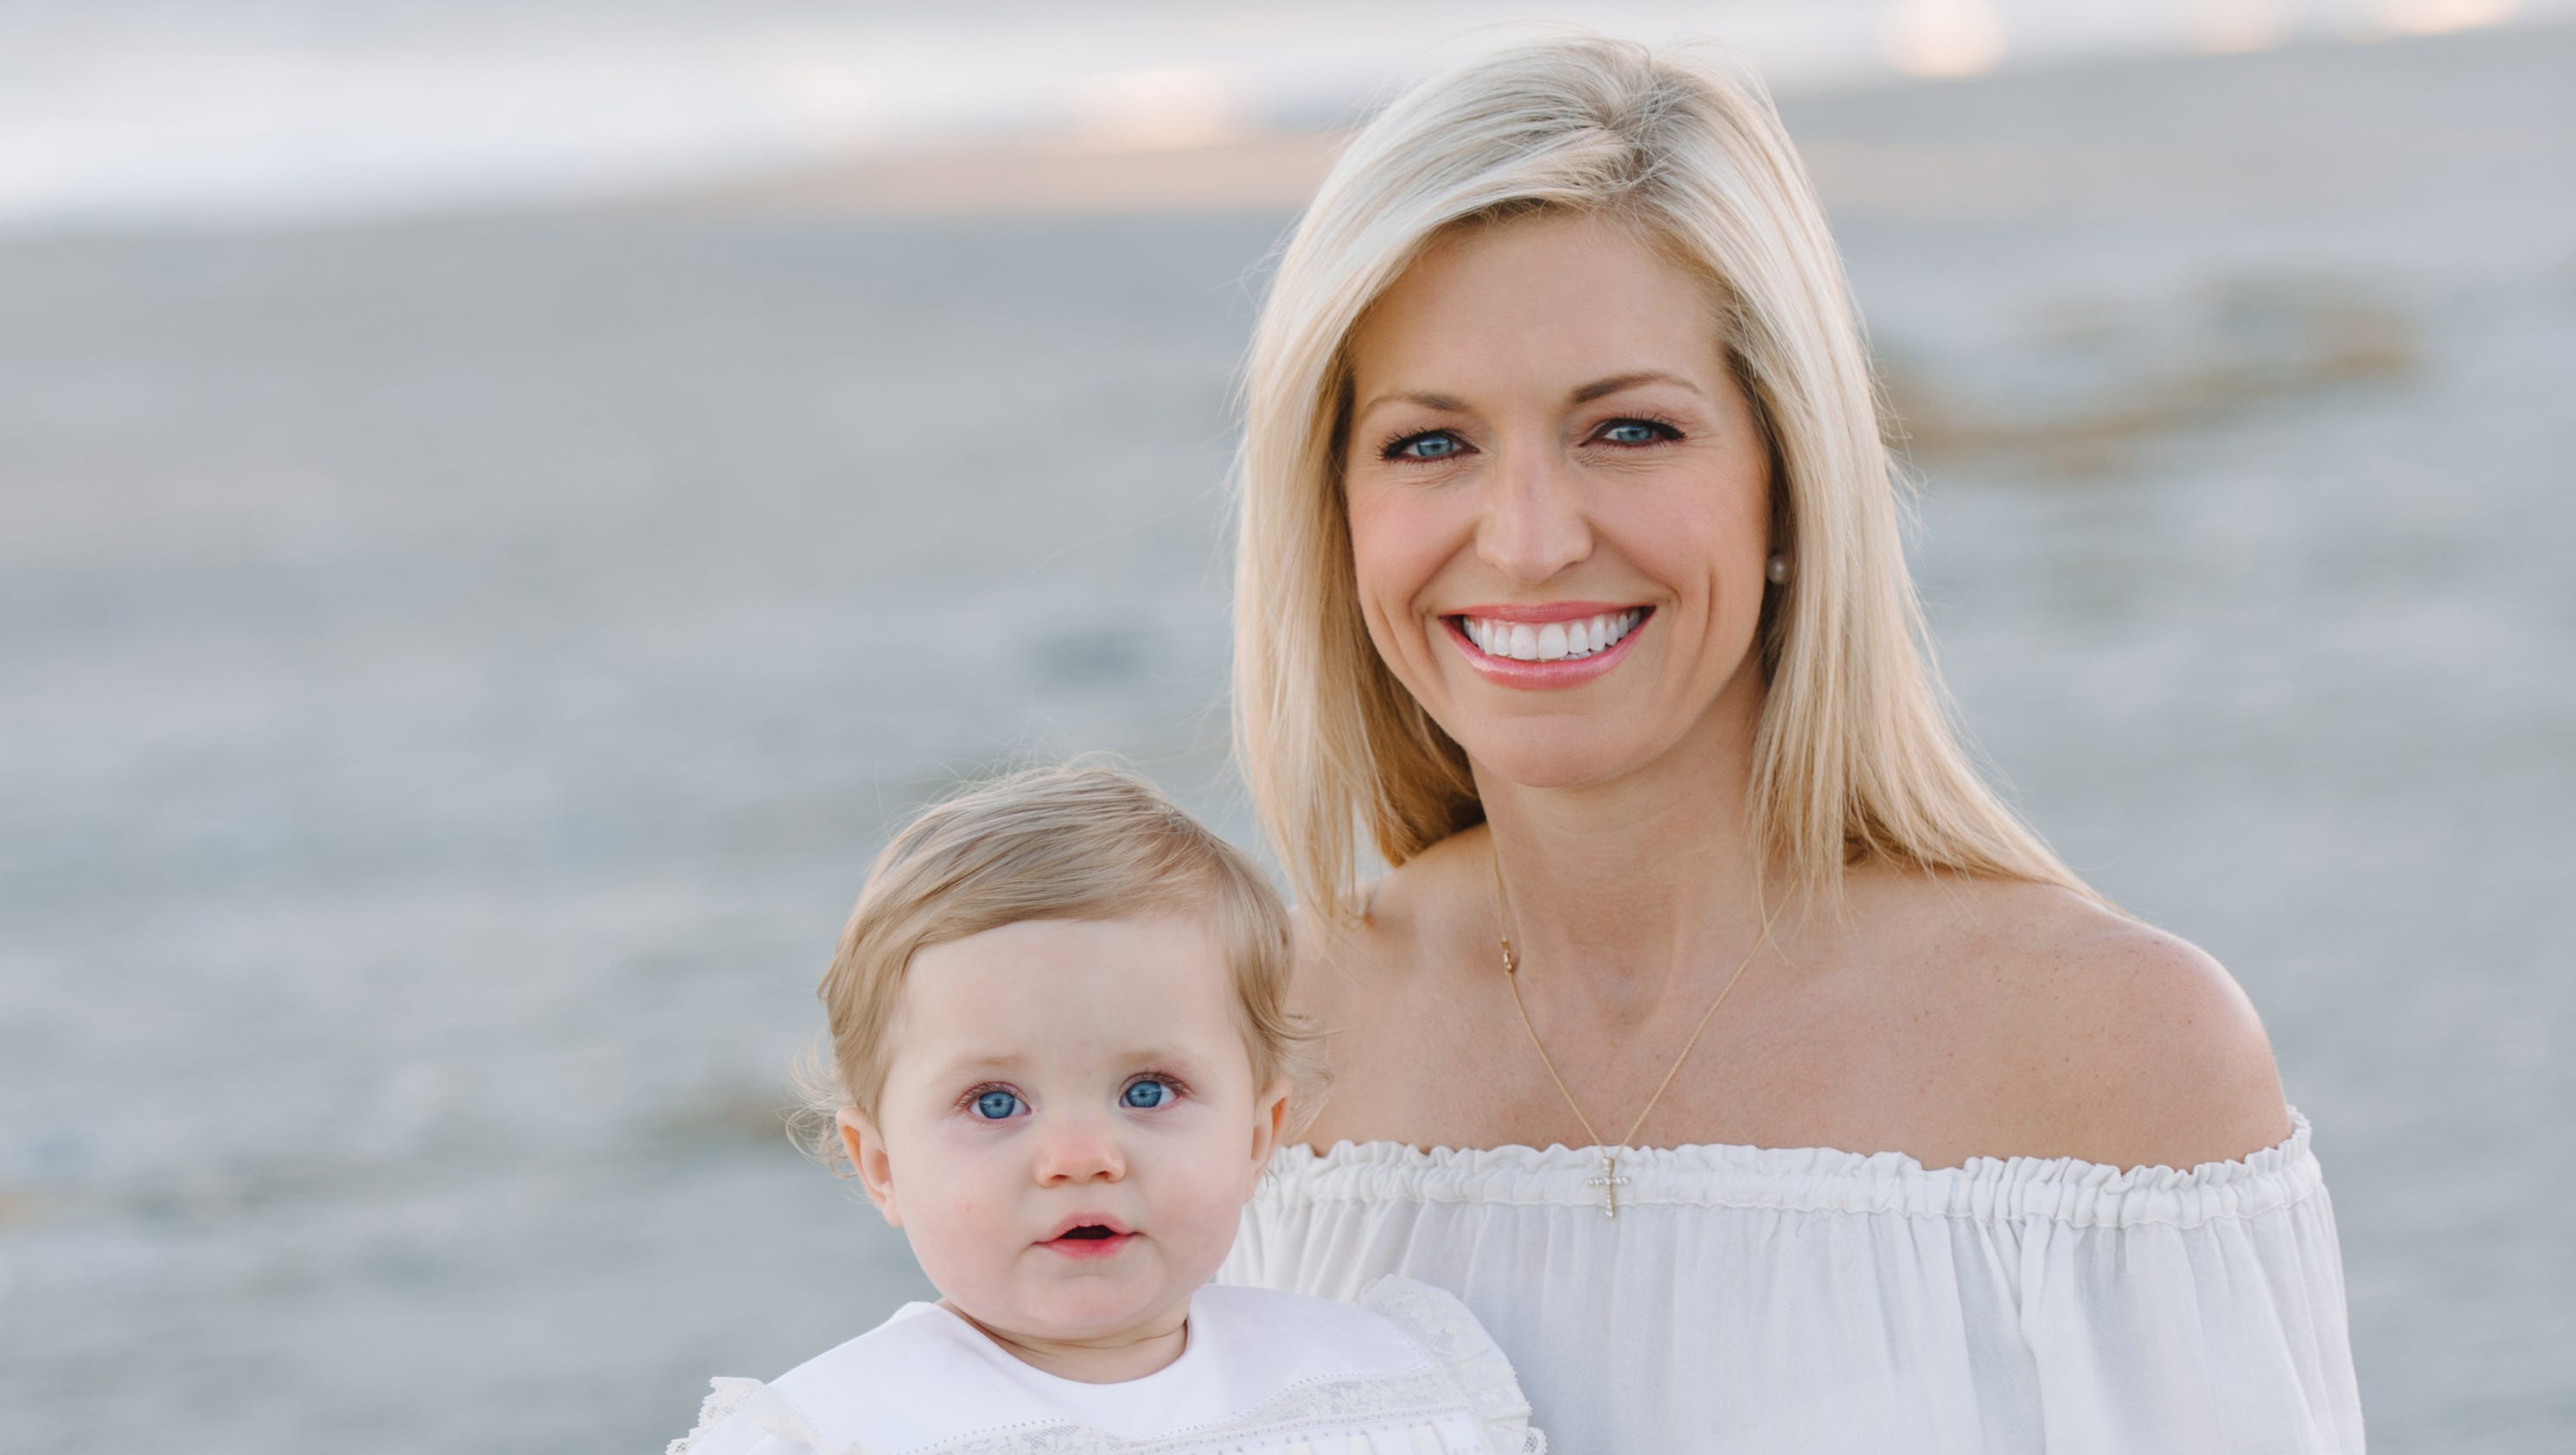 Fox News anchor Ainsley Earhardt to sign books in Greenville